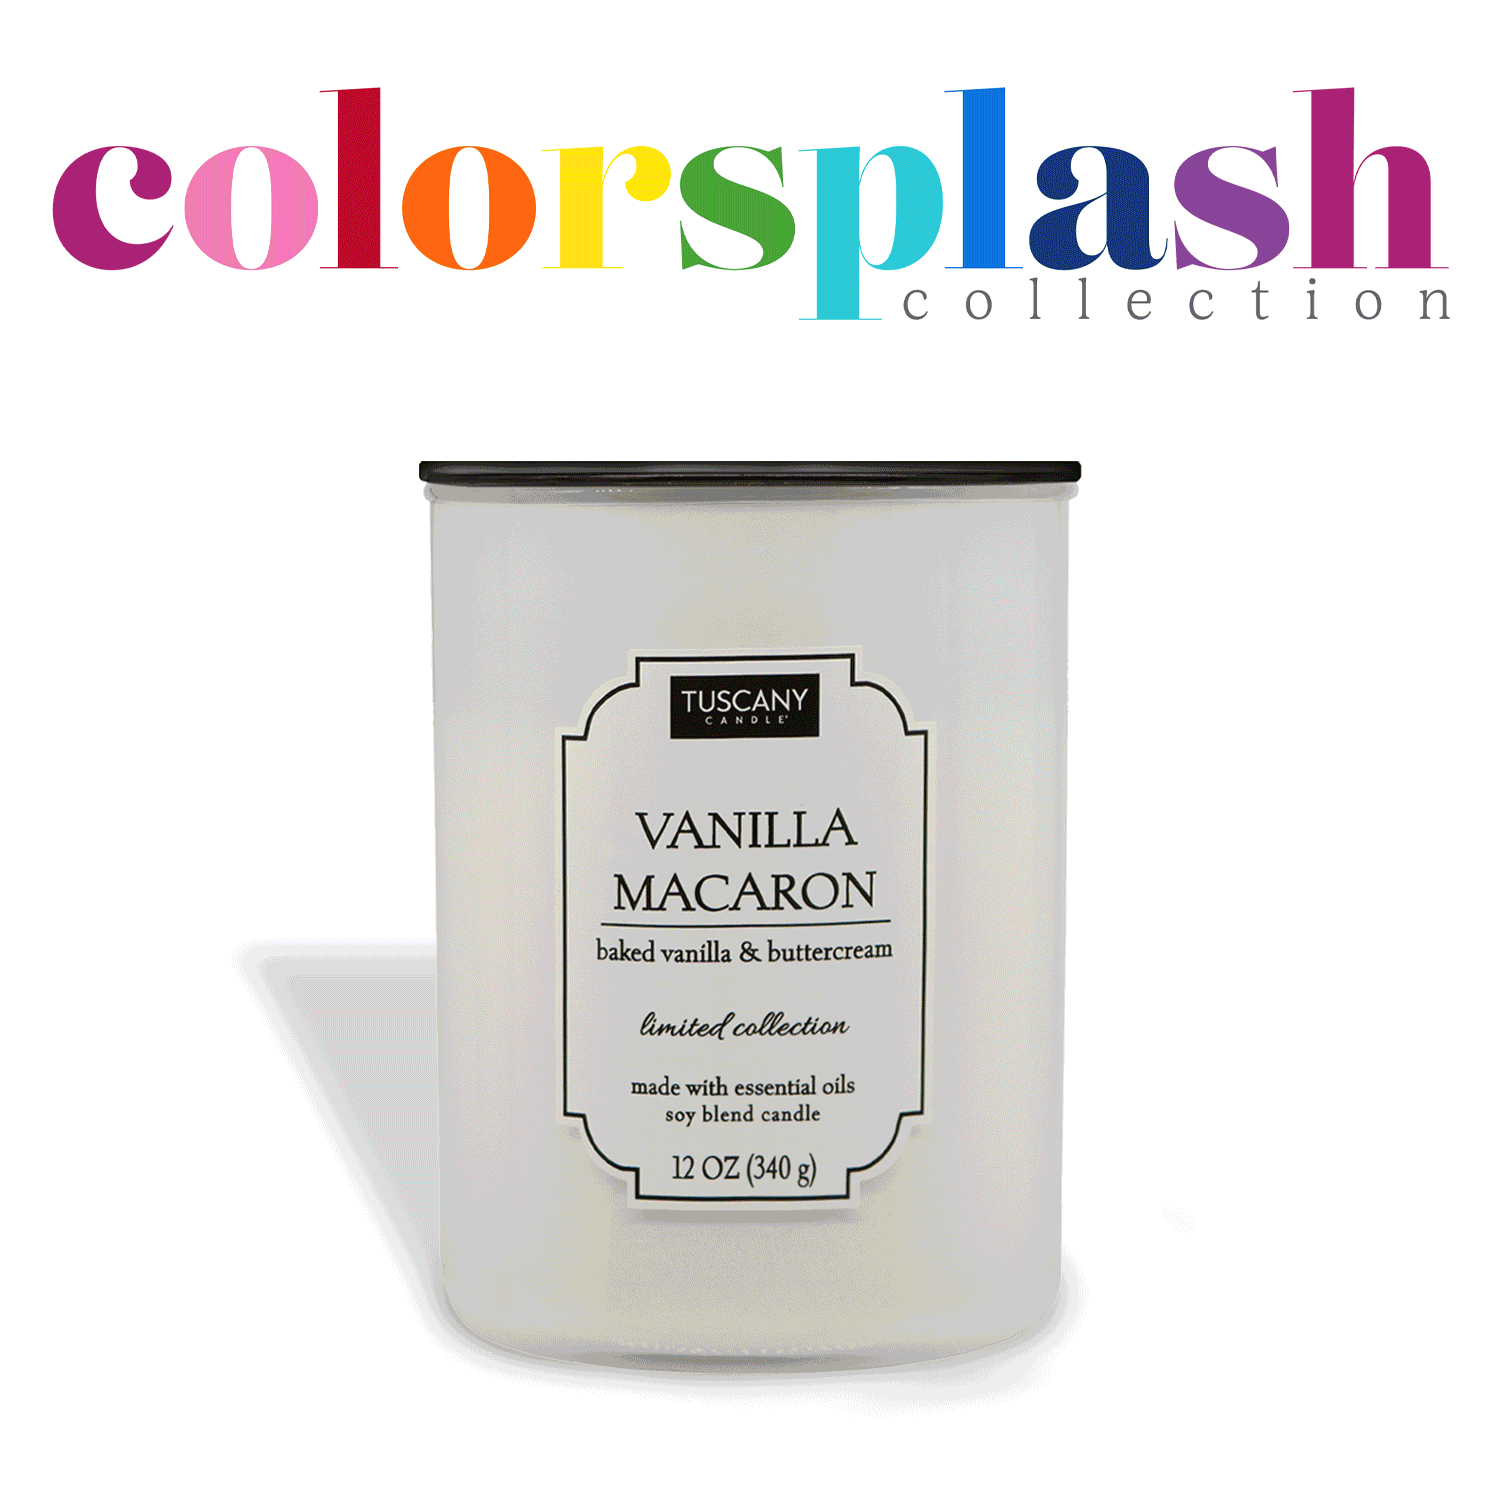 NEW CANDLE DROP - "ColorSplash" is in the house!